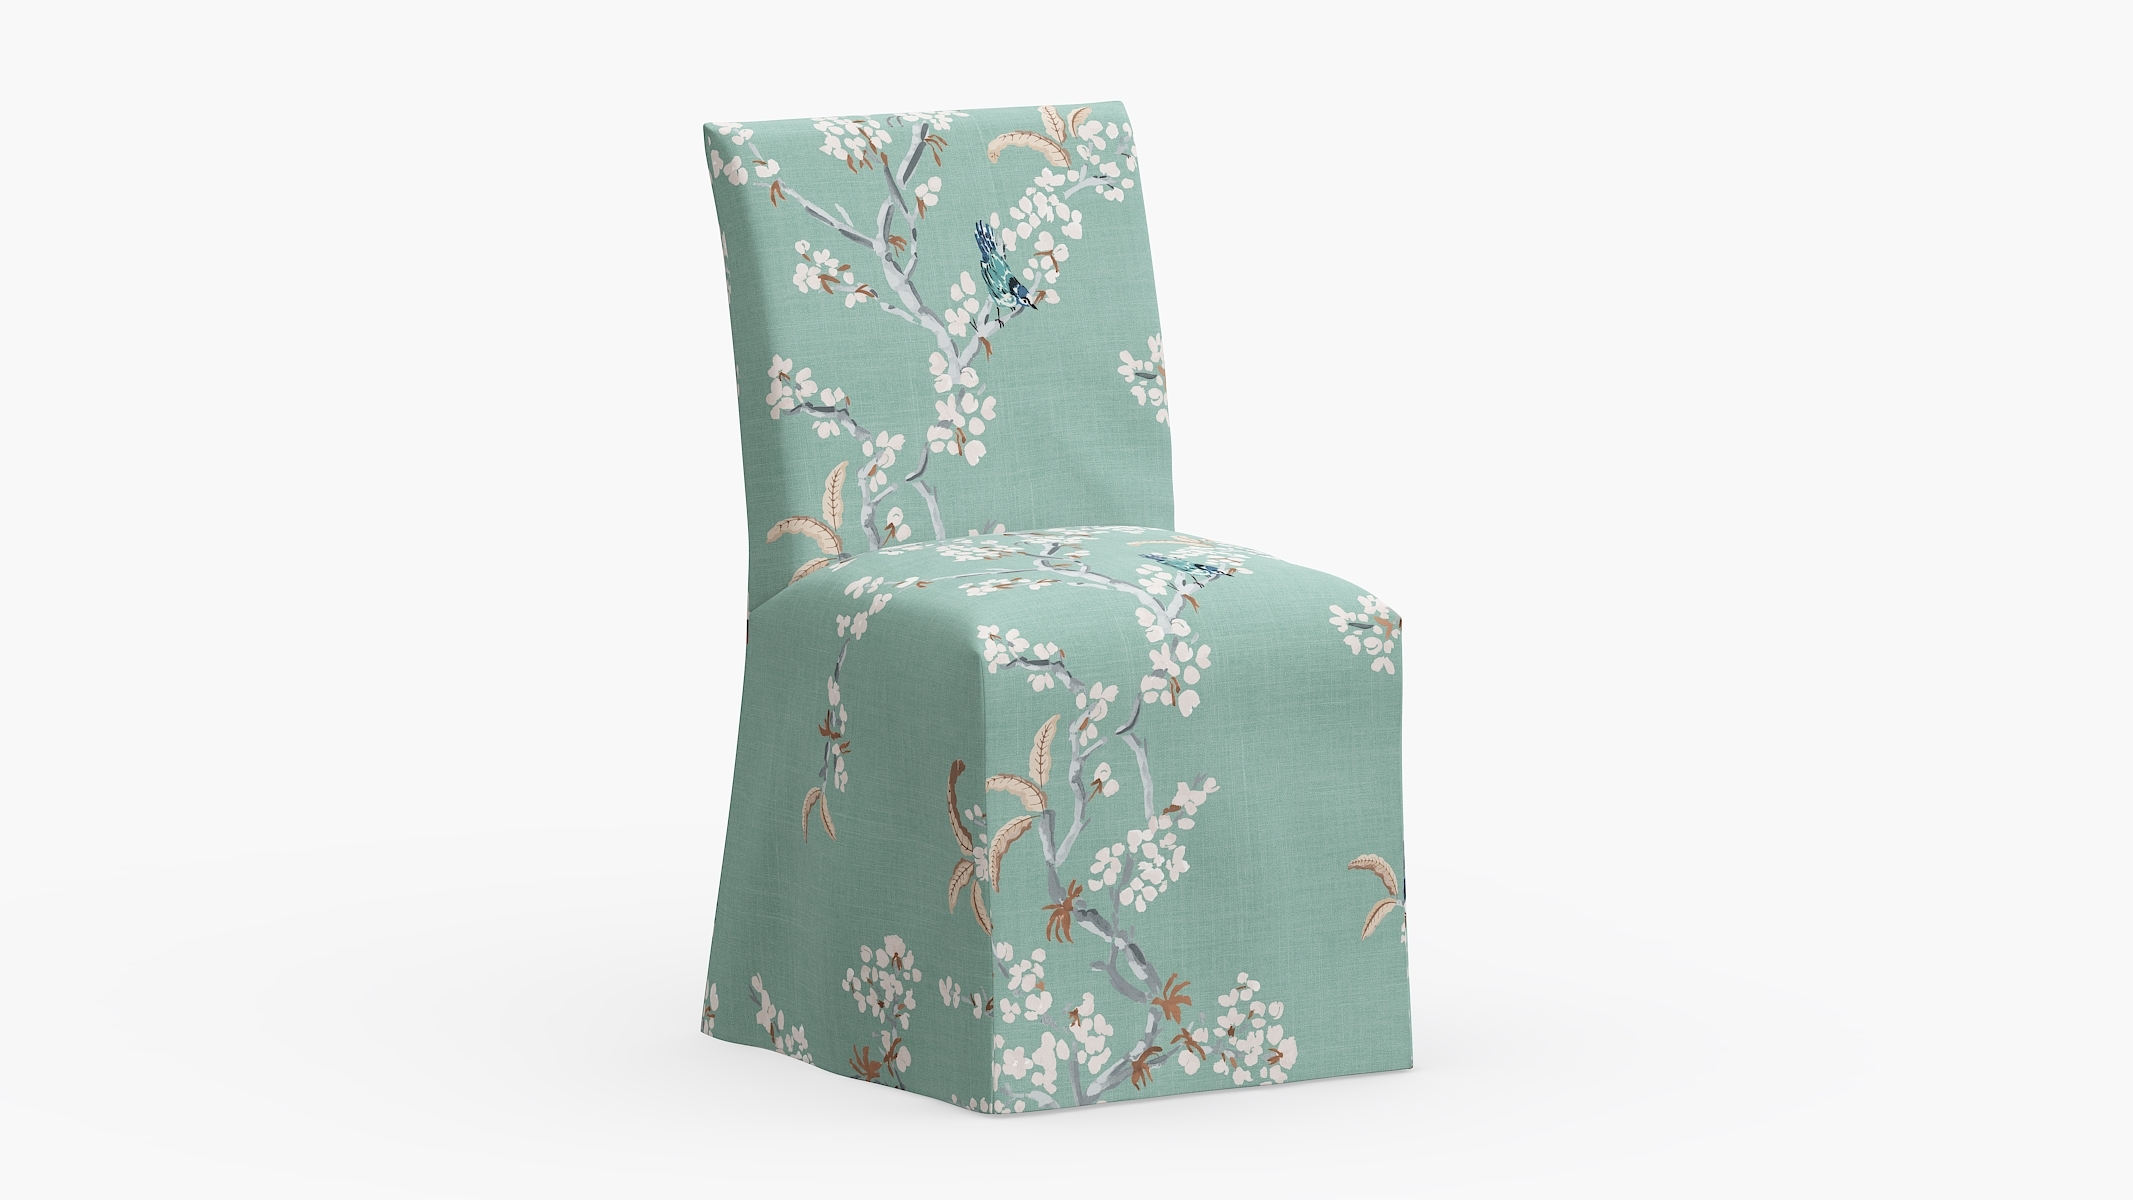 Slipcovered Dining Chair, Mint Cherry Blossom - Image 1